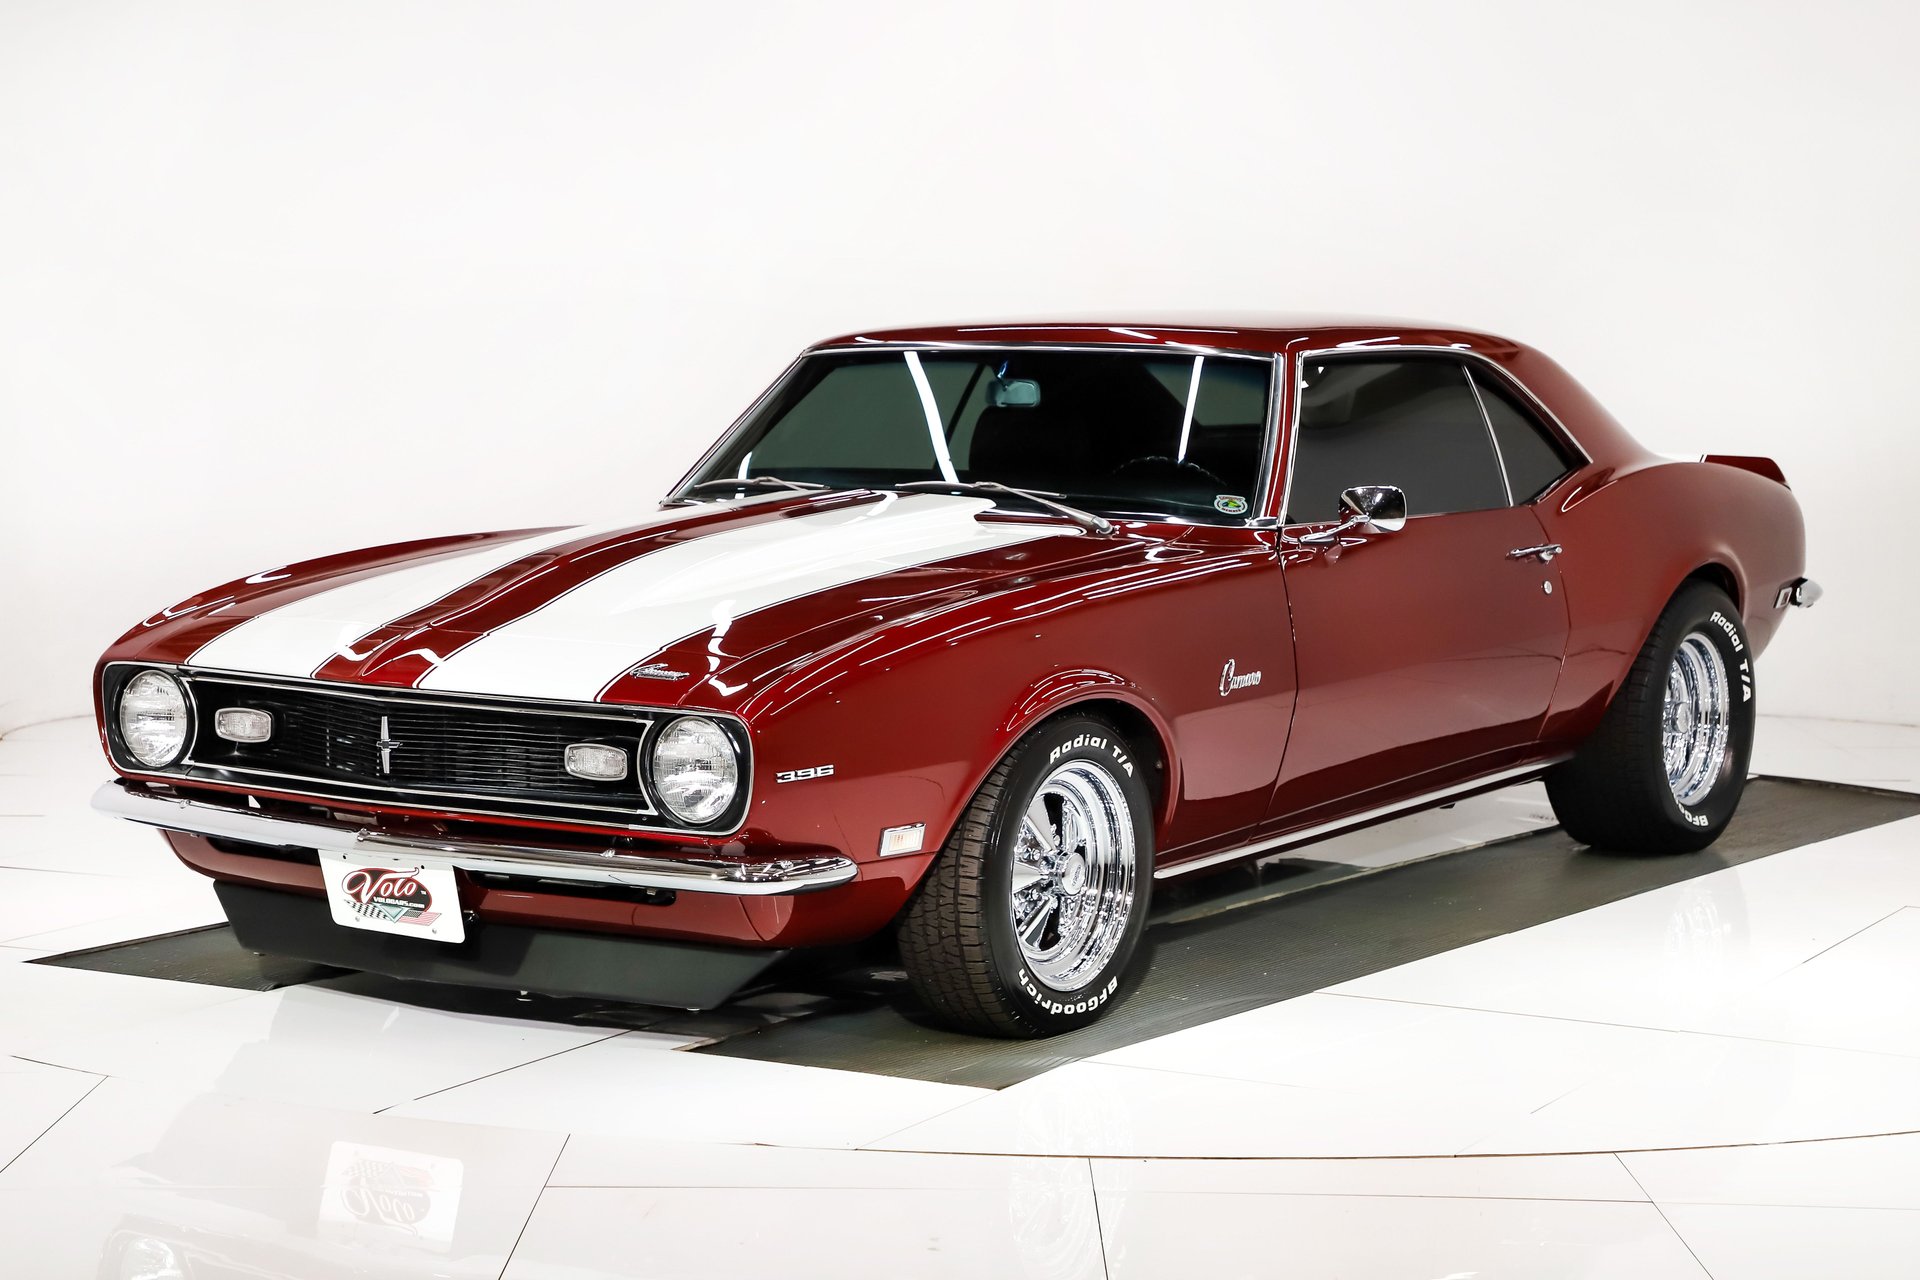 Classic Muscle Cars: 1968 Chevrolet Camaro